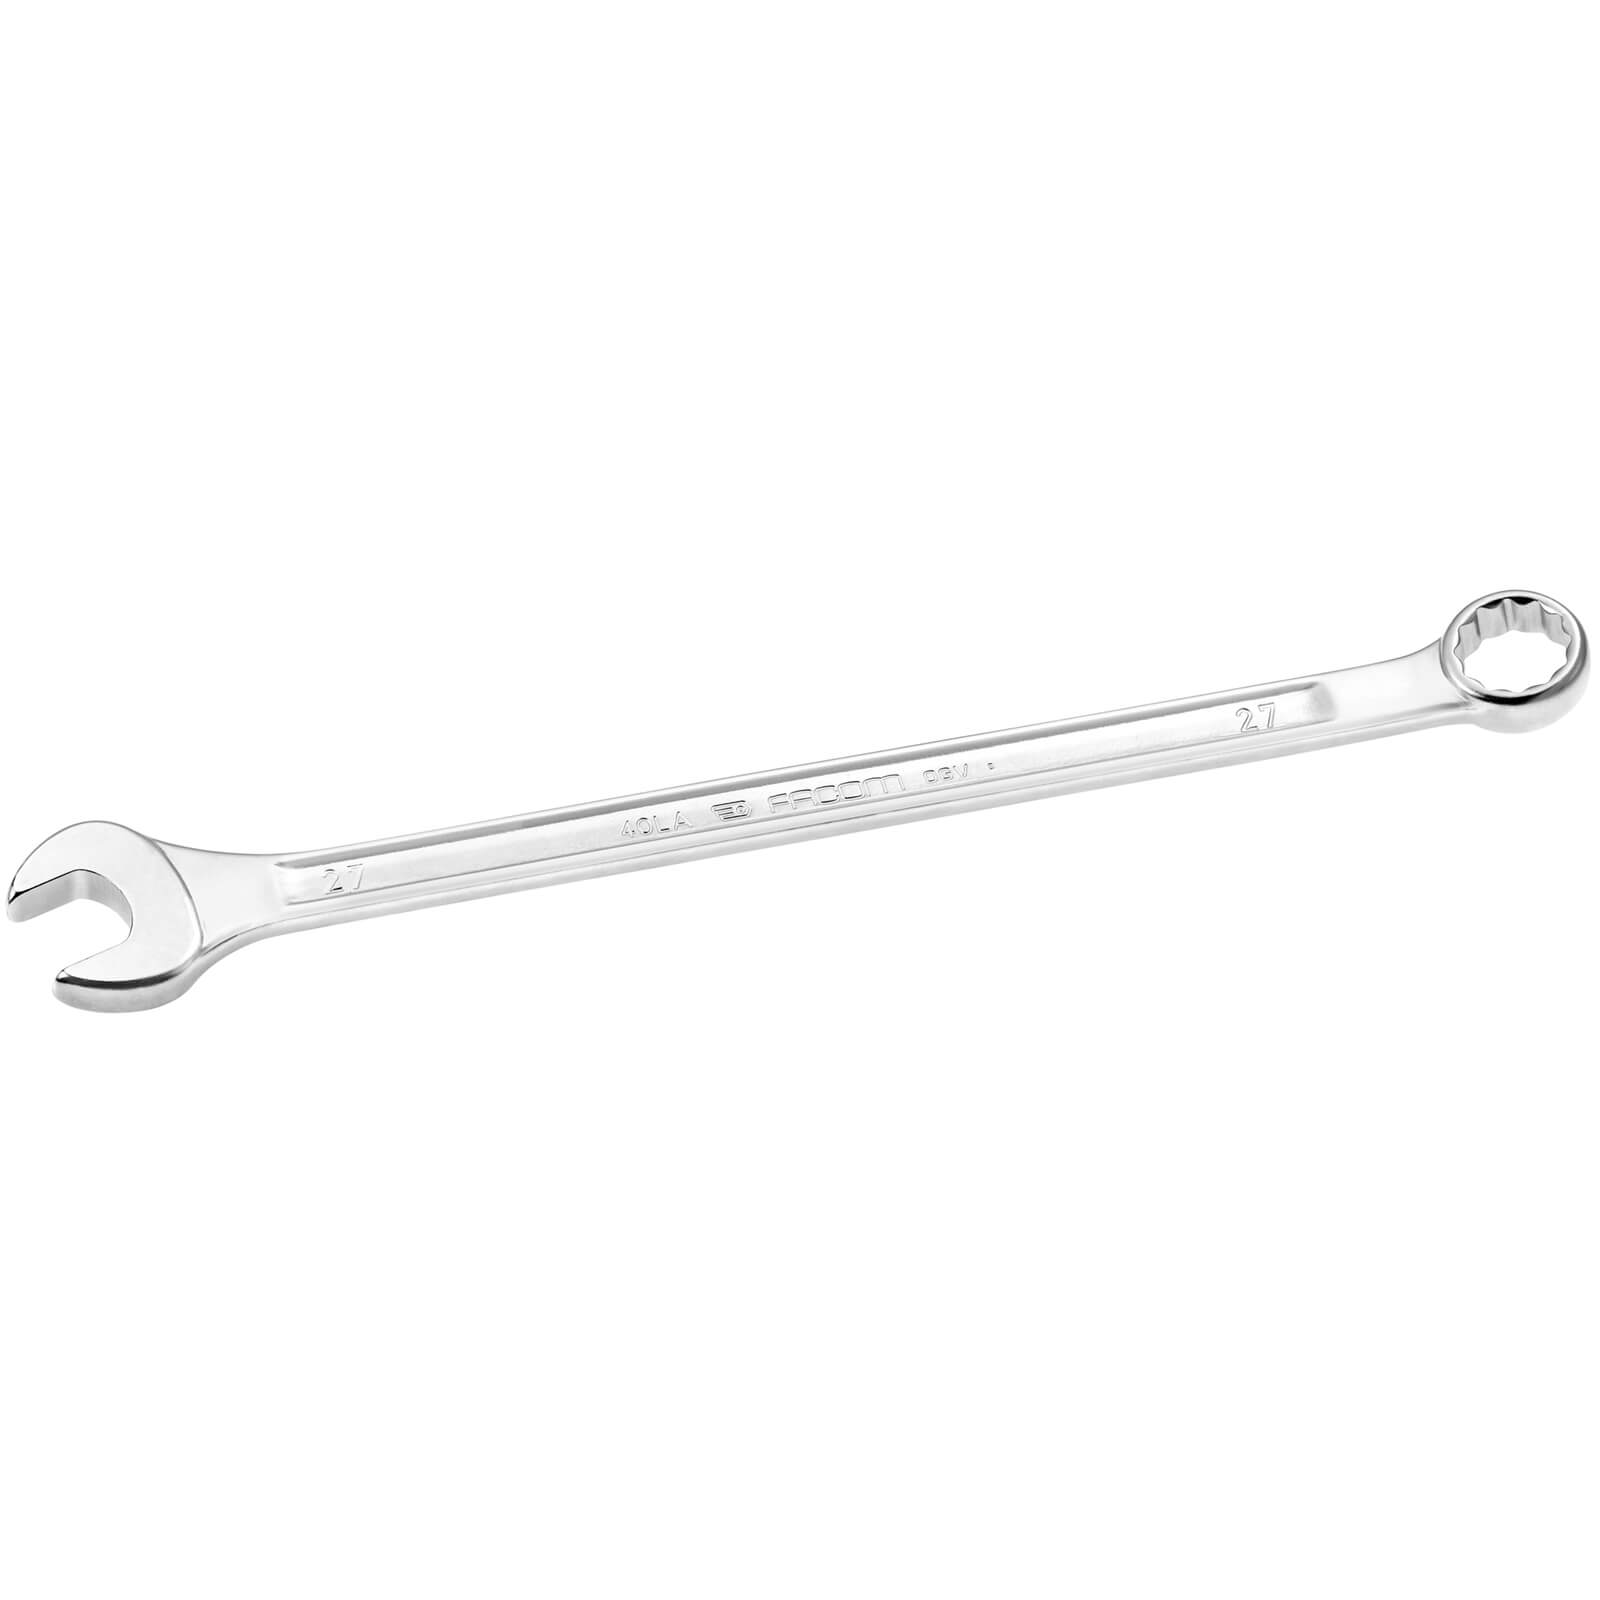 Image of Facom Long Reach Combination Spanner Metric 26mm